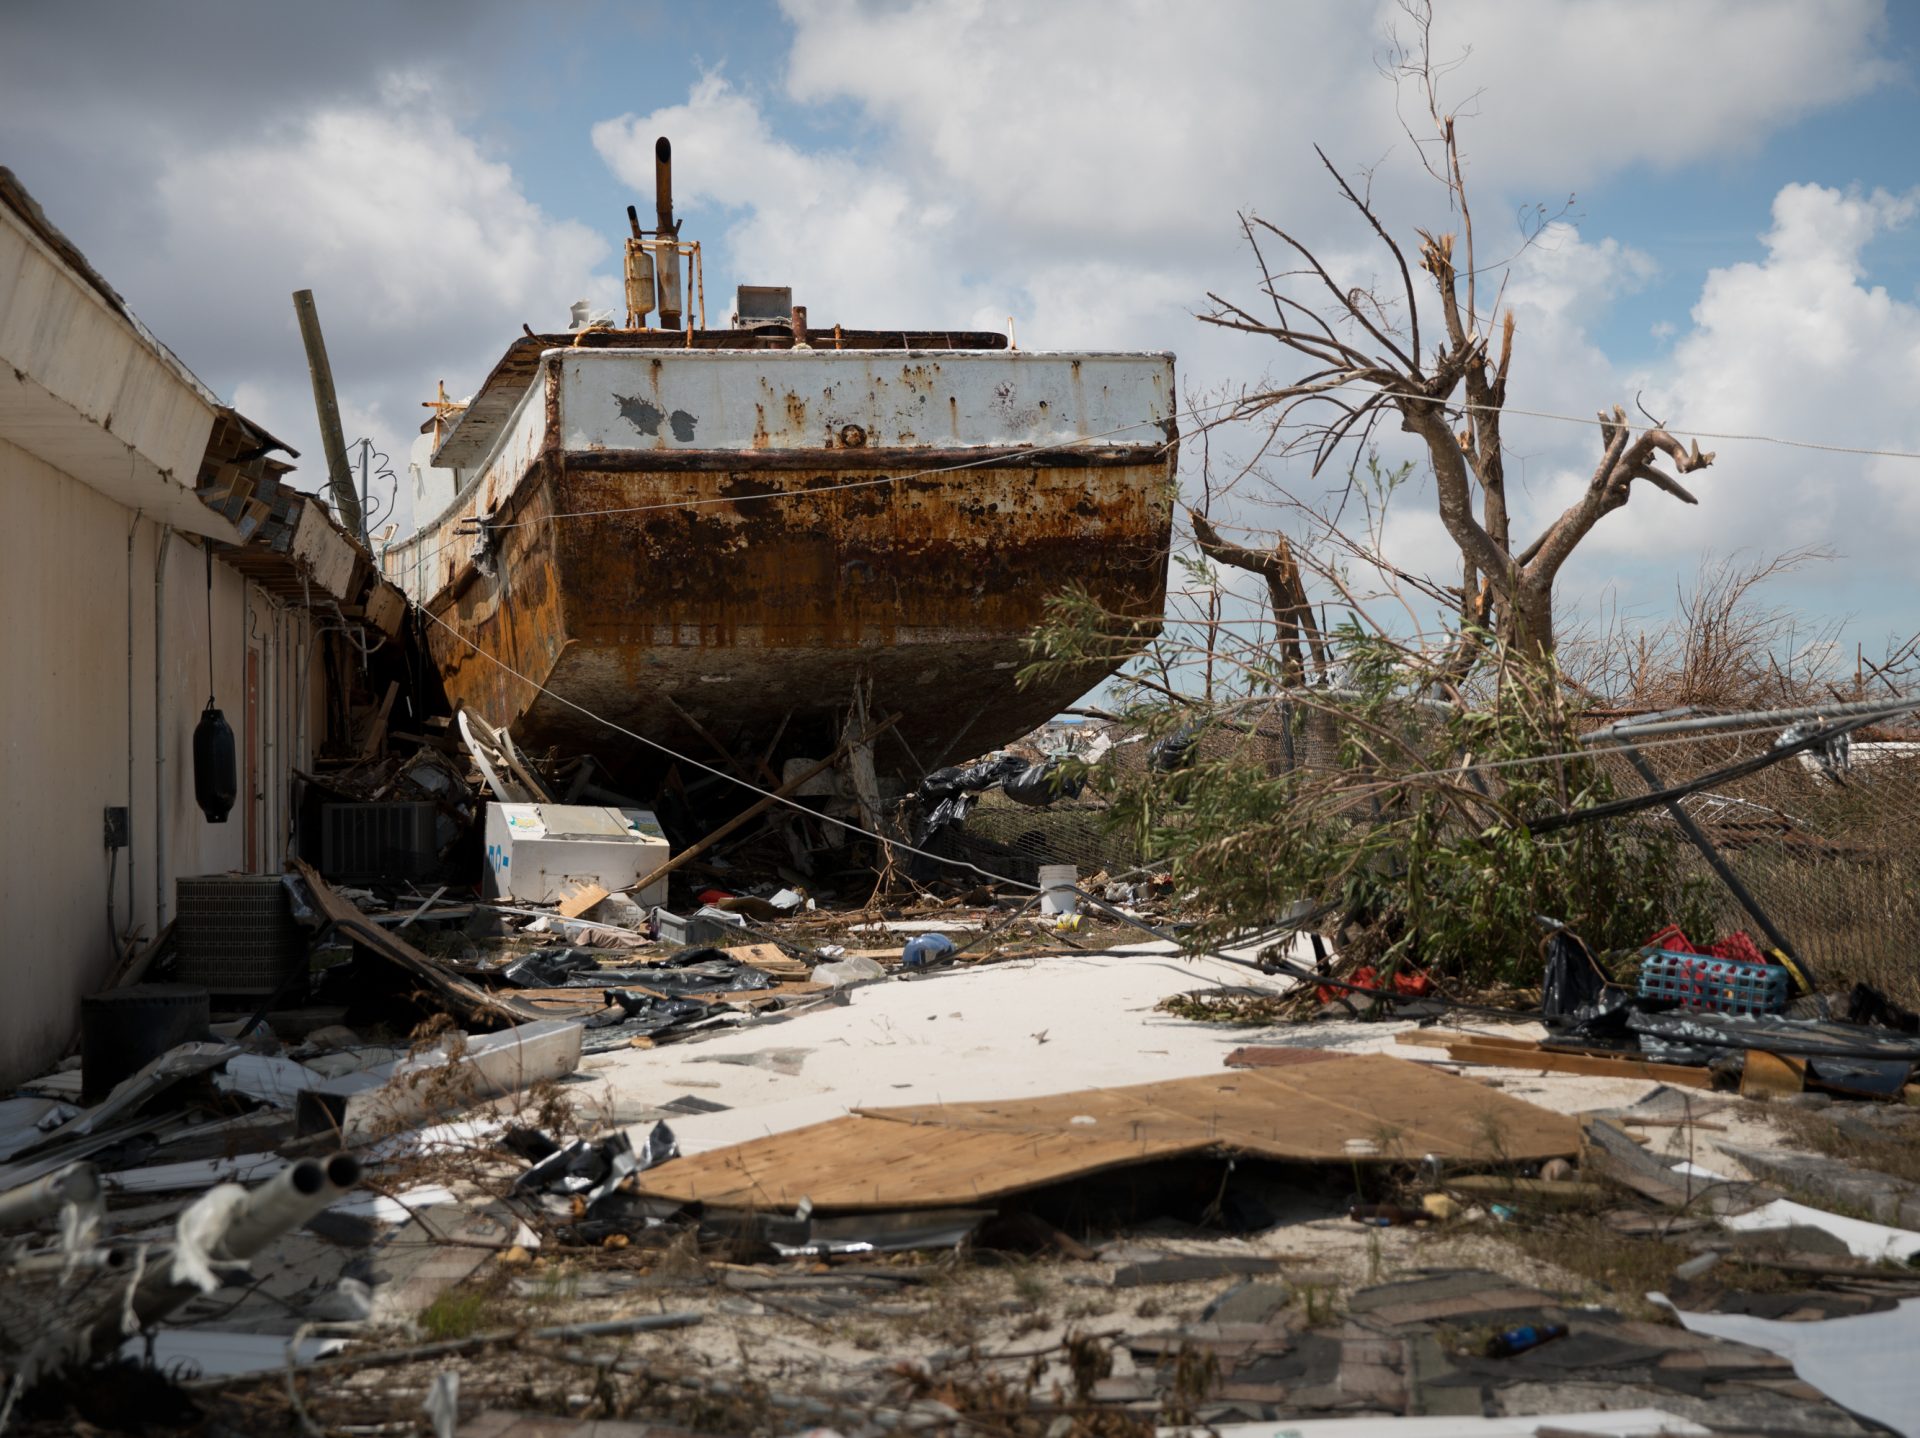 After the Category 5 storm slammed into the Bahamas this week, residents had to deal with wrecked houses and boats that came ashore.